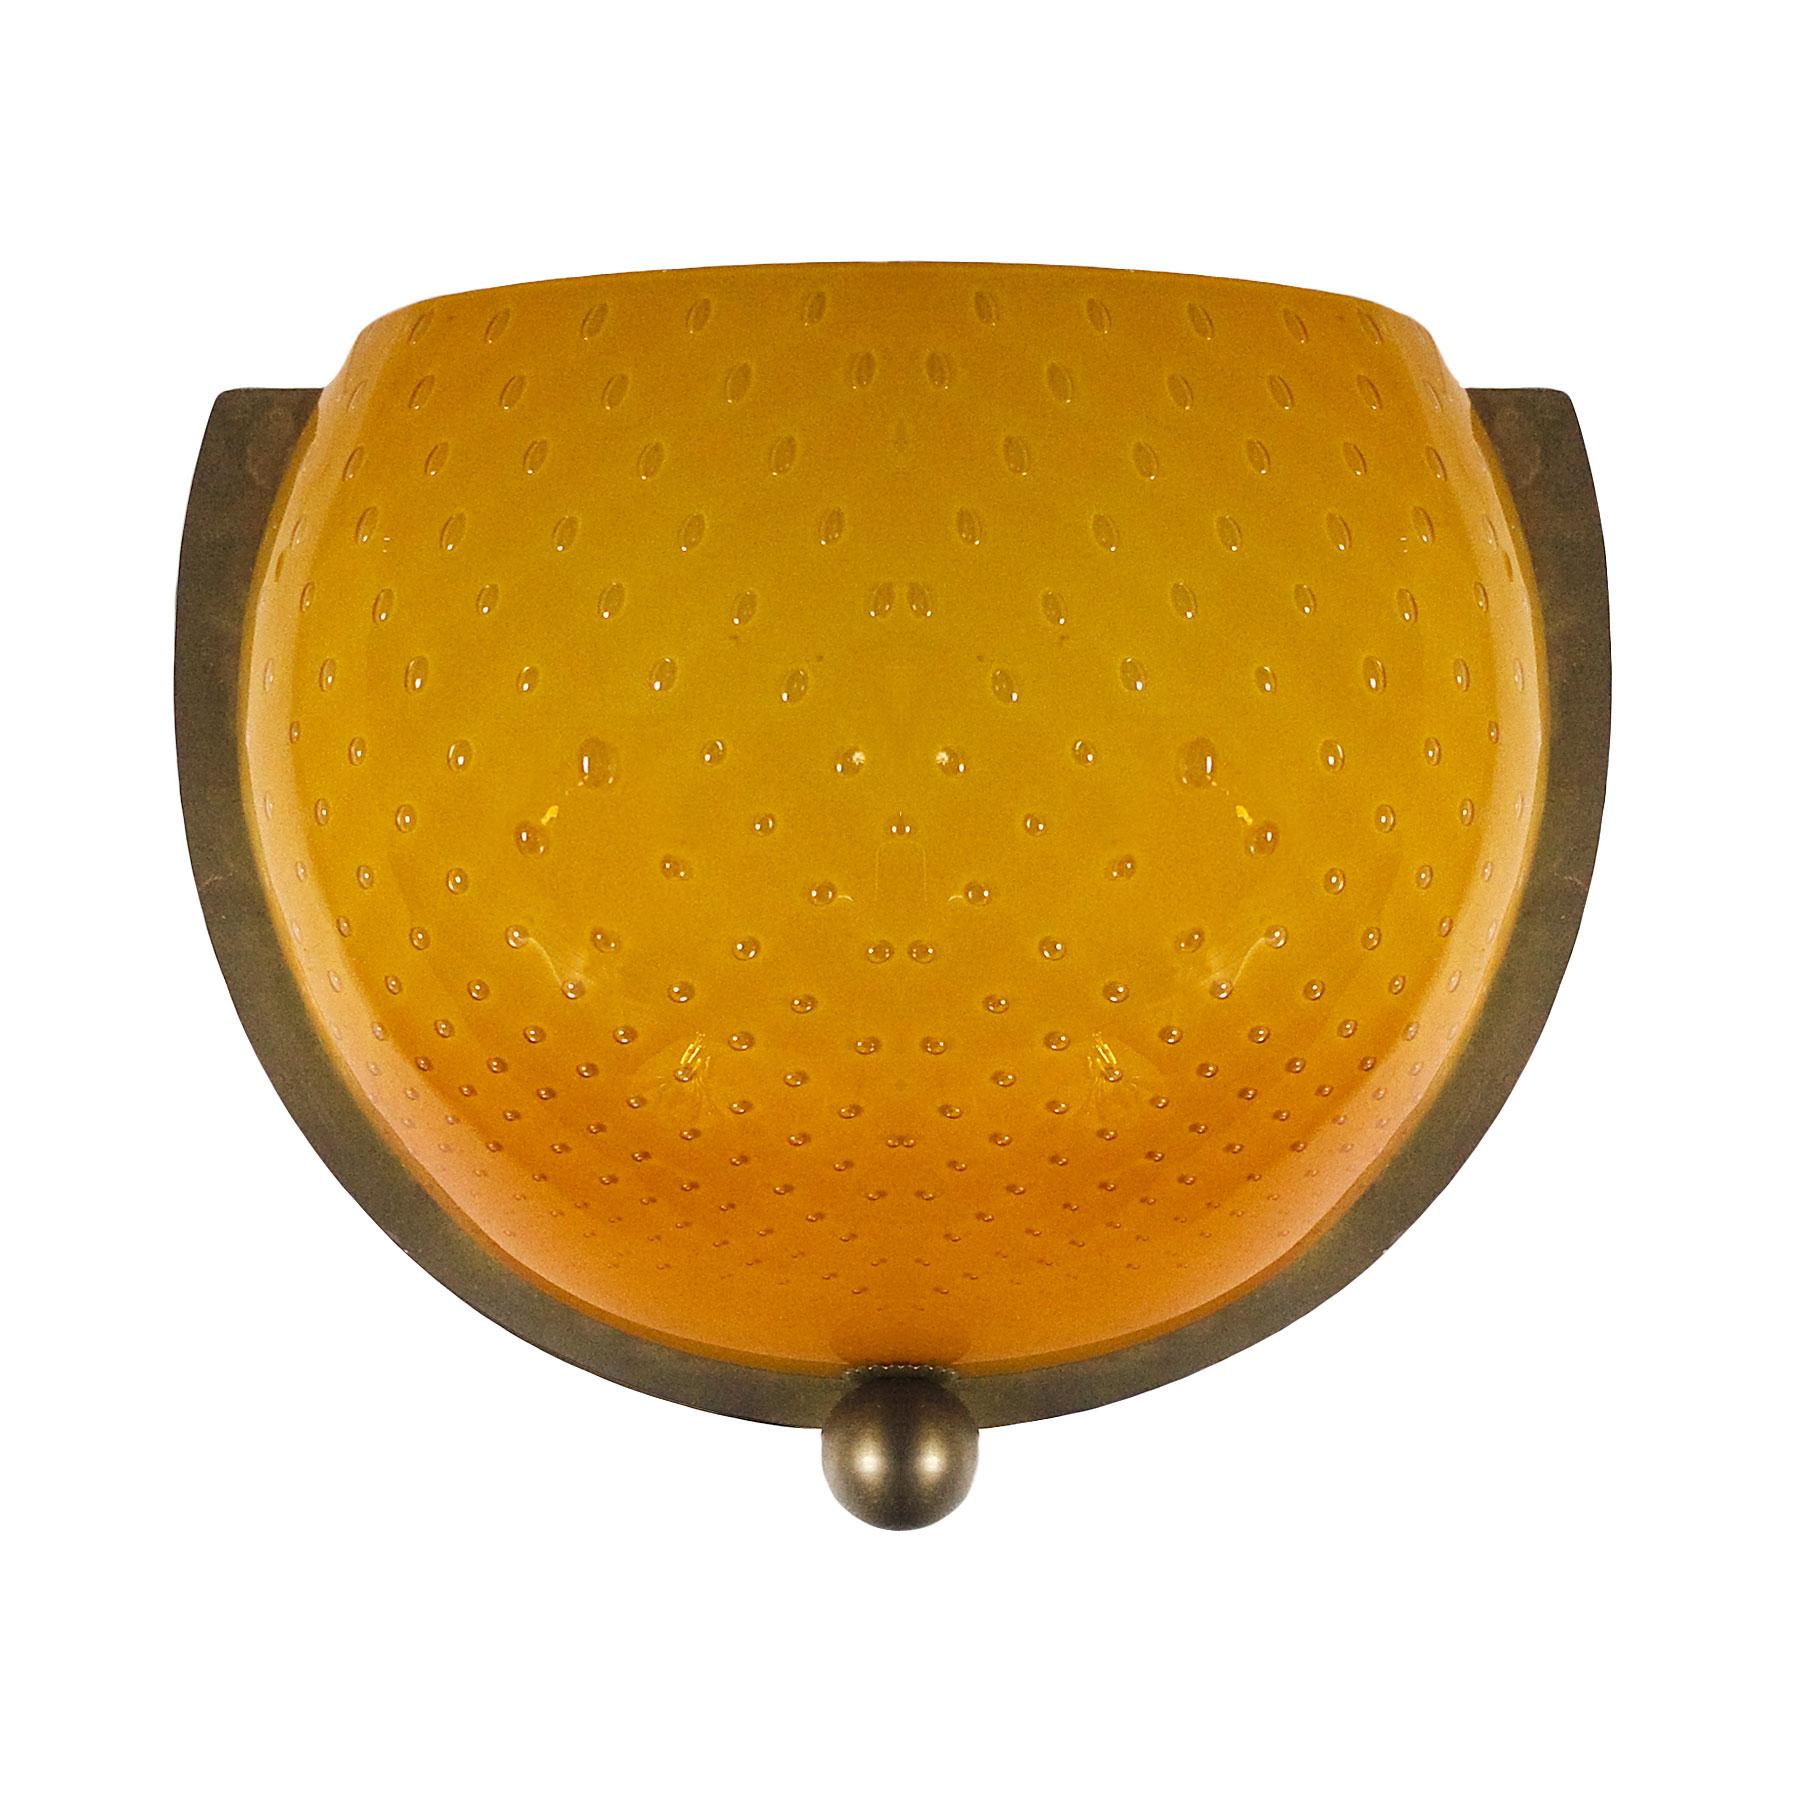 Pair of wall lights, brass support with yellow-orange bubble molten glass.

Italy, circa 1970.